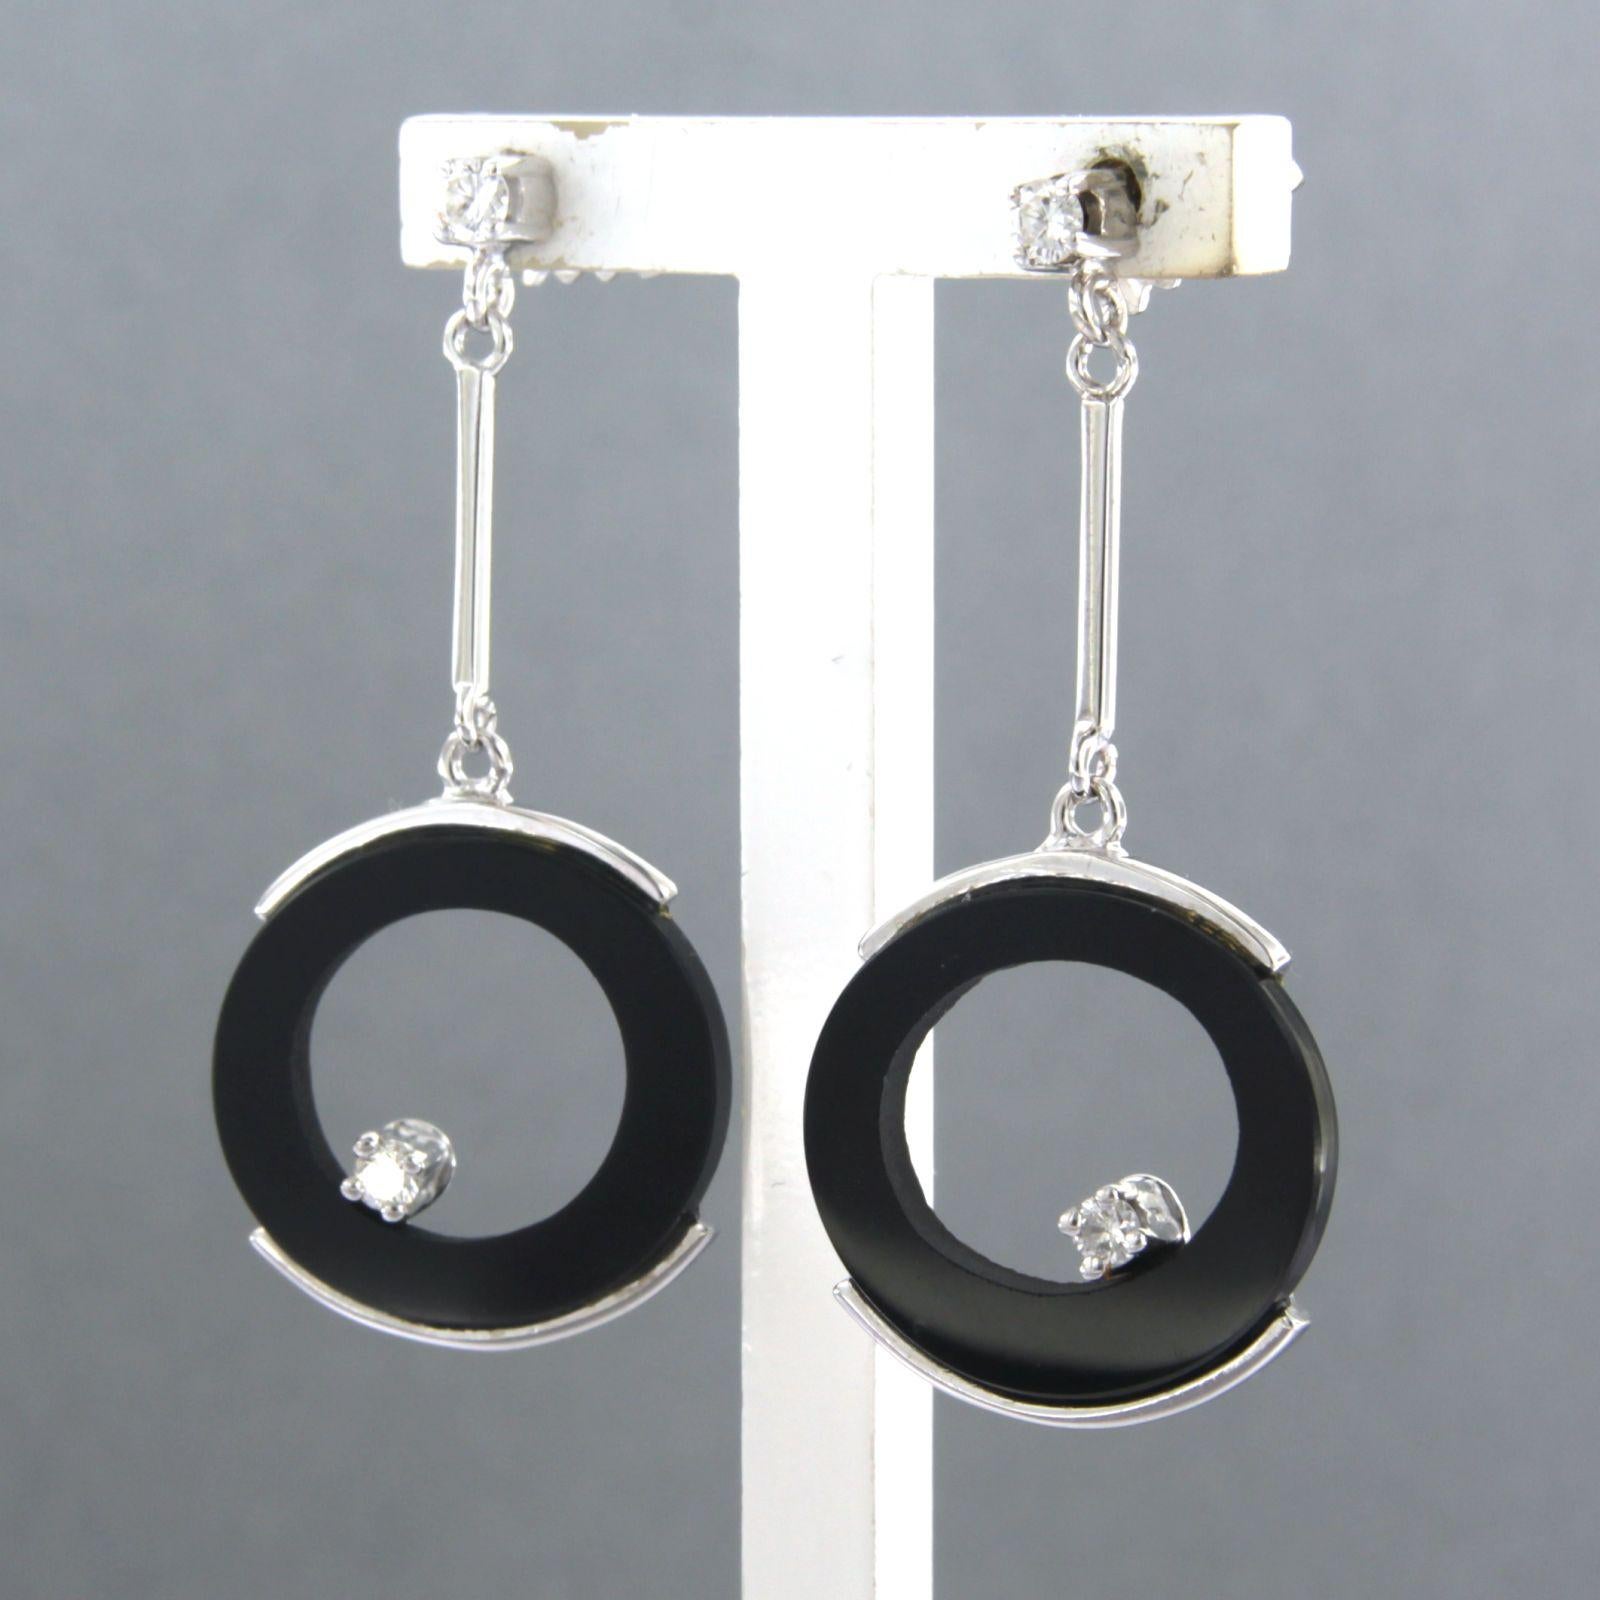 14 kt white gold earrings set with onyx and brilliant cut diamond 0.15 ct - F/G - VS/SI

Detailed description:

The earrings are 3.8 cm high and 1.7 cm wide

Total weight 5.4 grams

put with

- 2 x 1.7 cm flat circle cut onyx

colour black
purity :